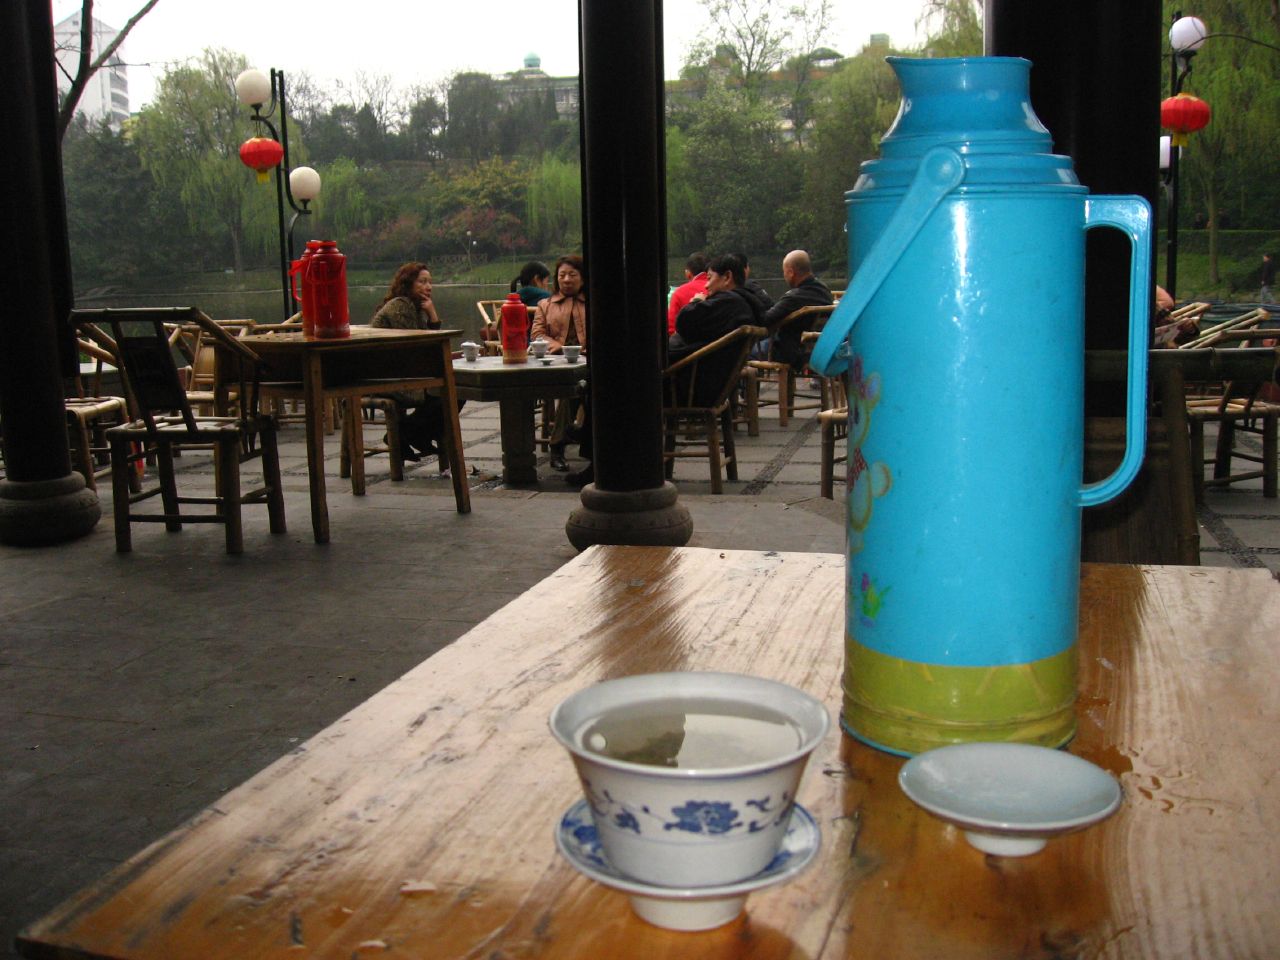 Large thermuses of hot water are given to customers who order tea in the People's Park of Chengdu, China.